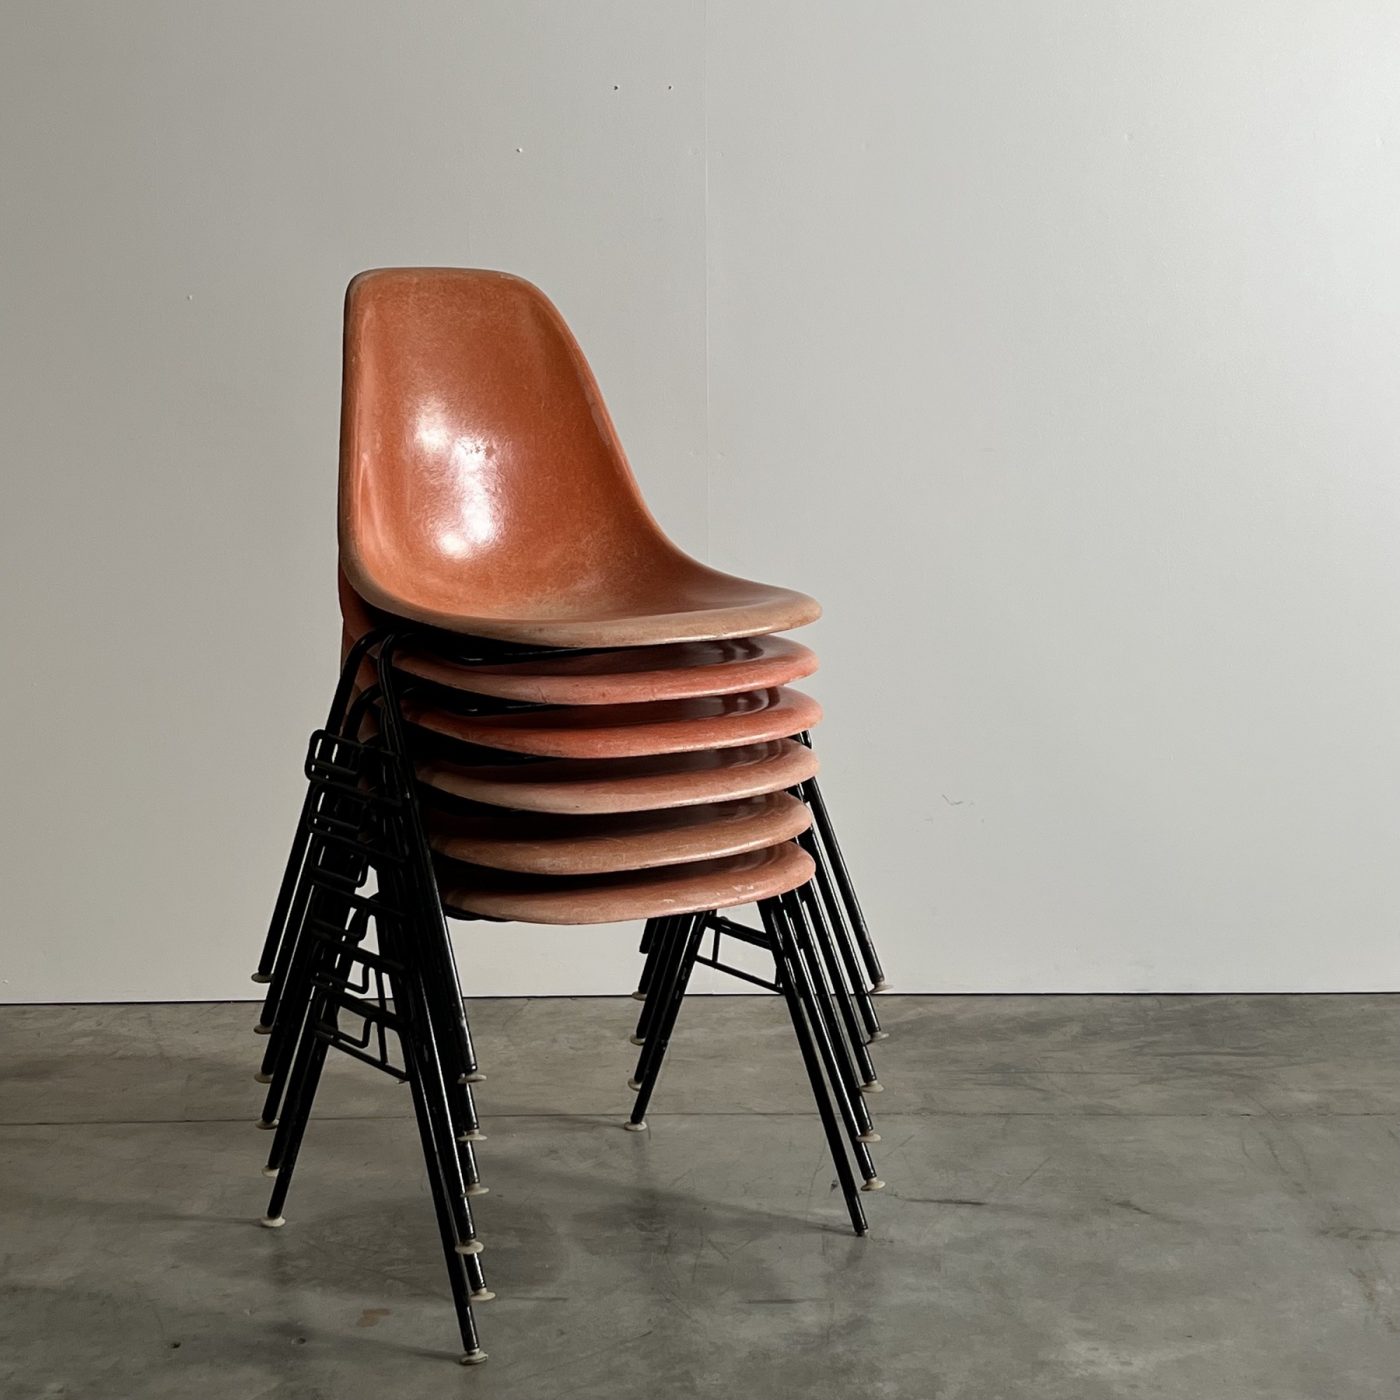 objet-eames-chairs0005